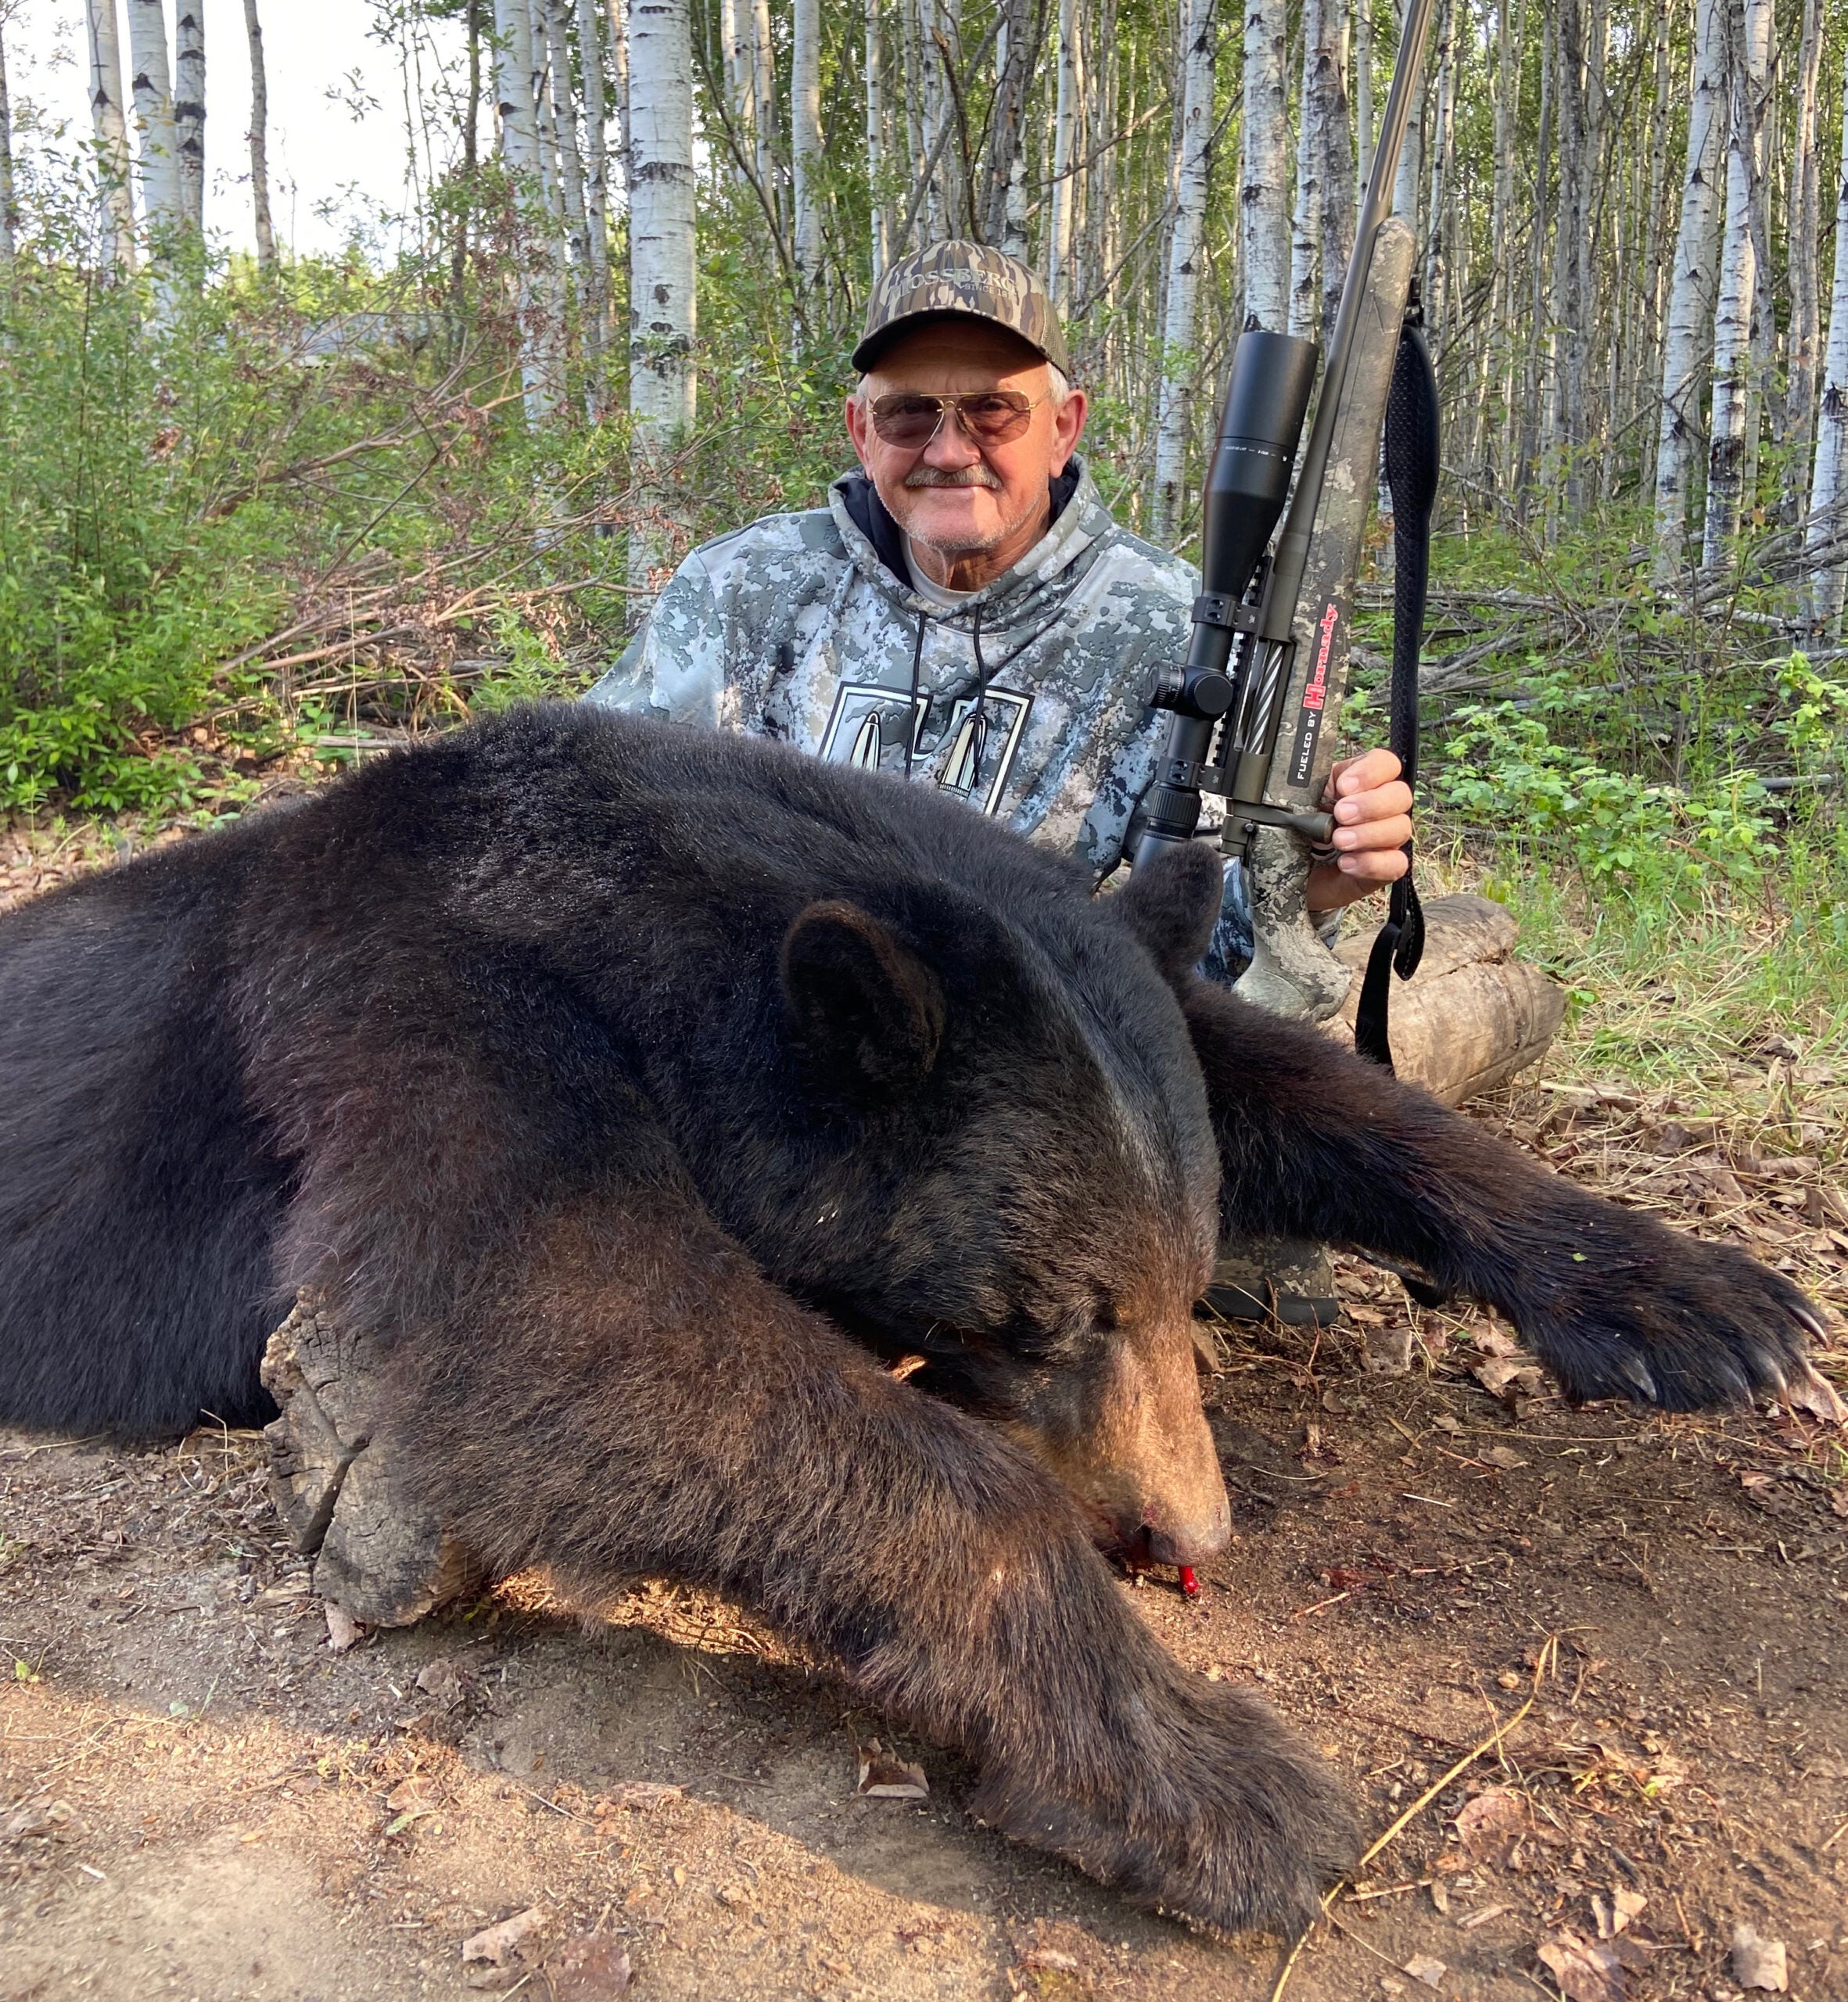 Pro shooter Jerry Miculek, holding a rifle, poses with a black bear he took in Canada.